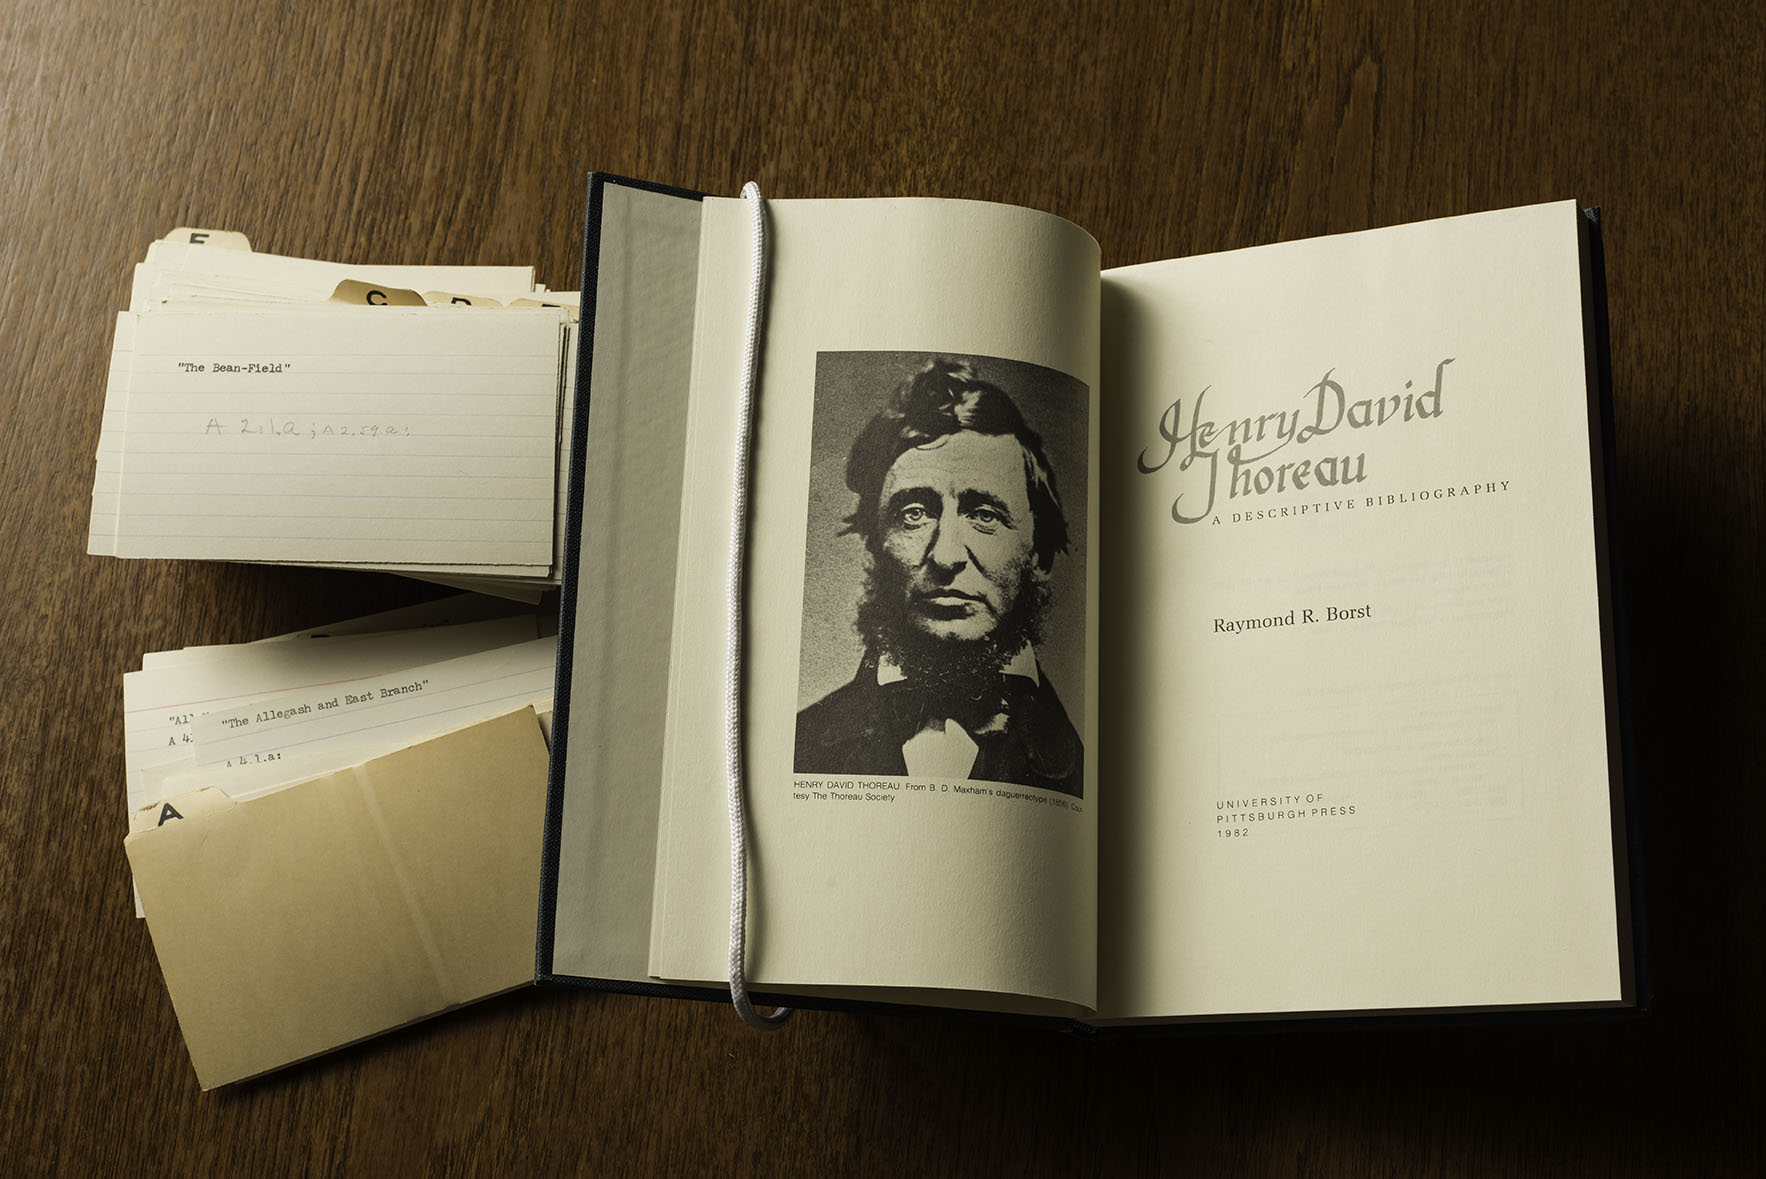 Borst’s first foray into scholarly work was Henry David Thoreau: A Descriptive Bibliography (University of Pittsburgh Press, 1982). Borst traveled to libraries in Europe and around the United States to produce this detailed catalogue of all of Thoreau’s publications, a resource still relied on by scholars and book dealers.  (Department of Rare Books & Special Collections / Photo by J. Adam Fenster)      